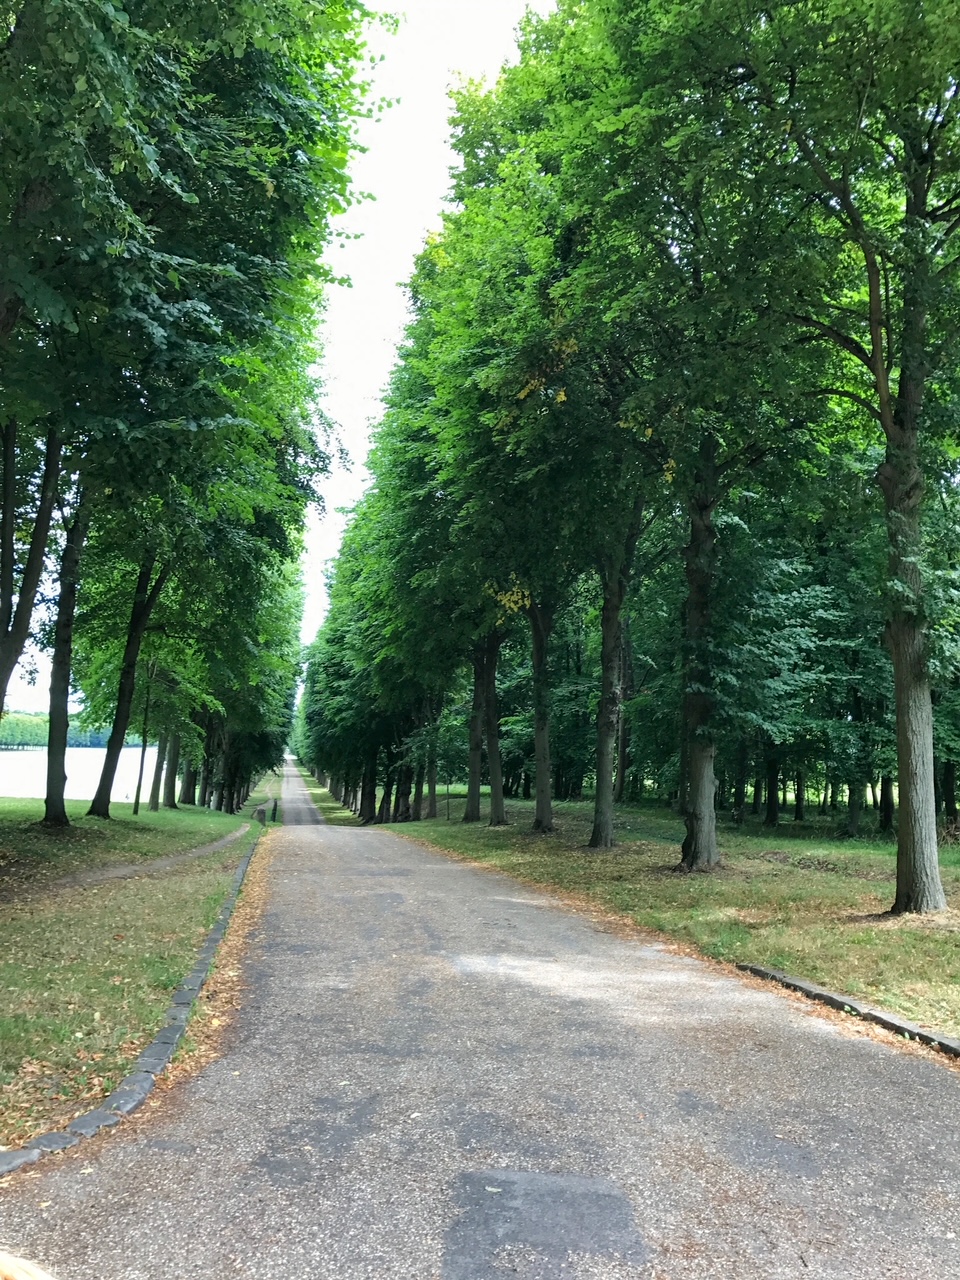 the Royal forests at the Palace of Versailles